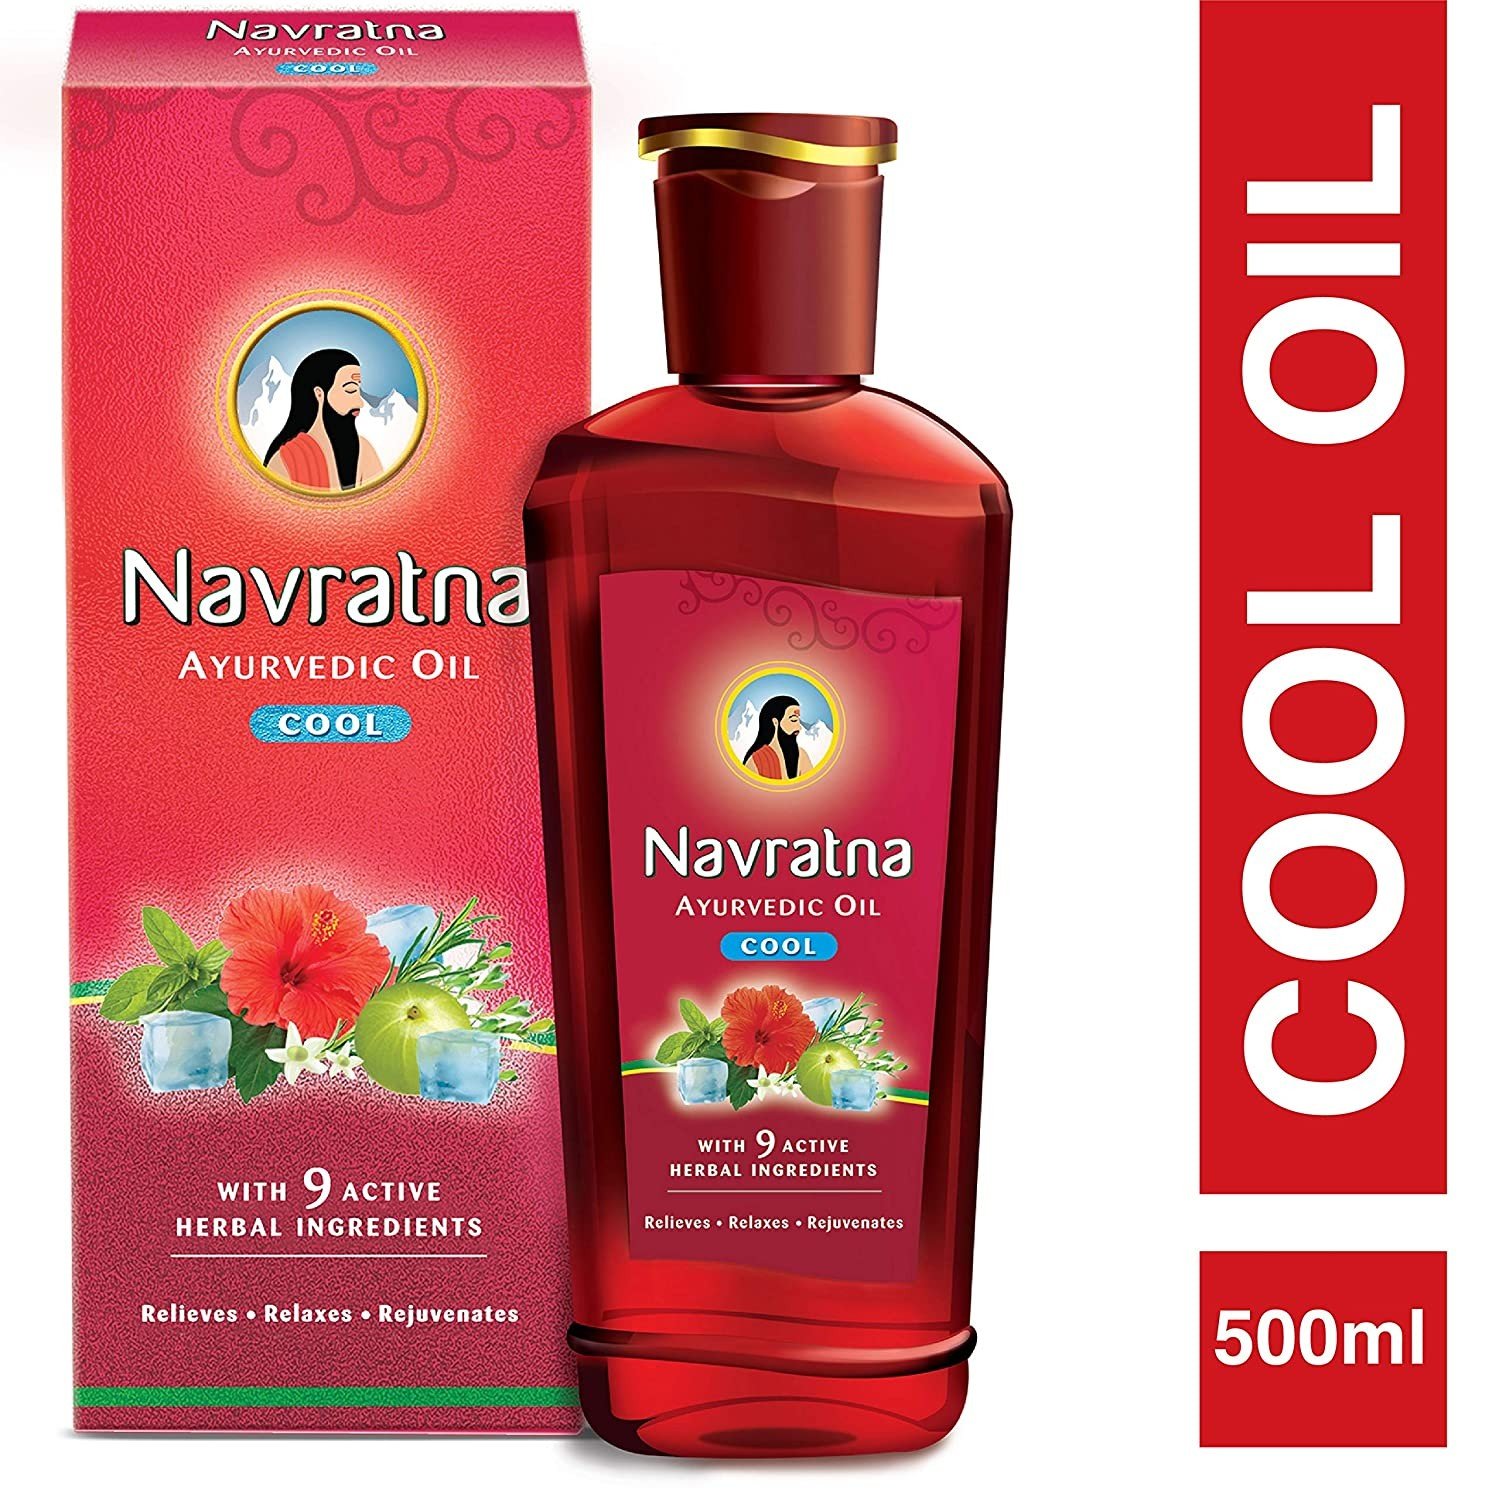 Navratna Ayurvedic Cool hair oil ( 500ml ) Relaxes The Muscles, Cooling Effect On The Scalp And Body with 9 herbal ingredients